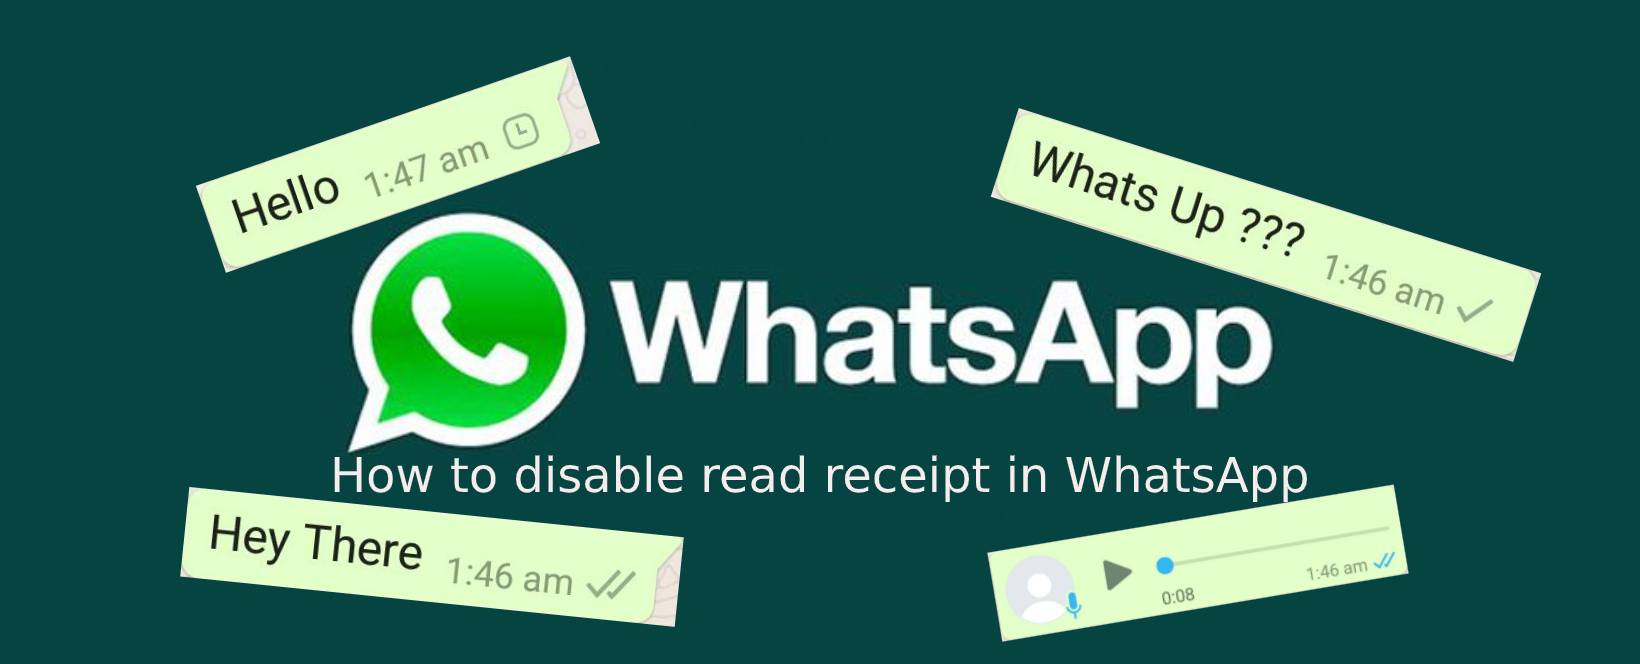 How to disable read receipt in WhatsApp